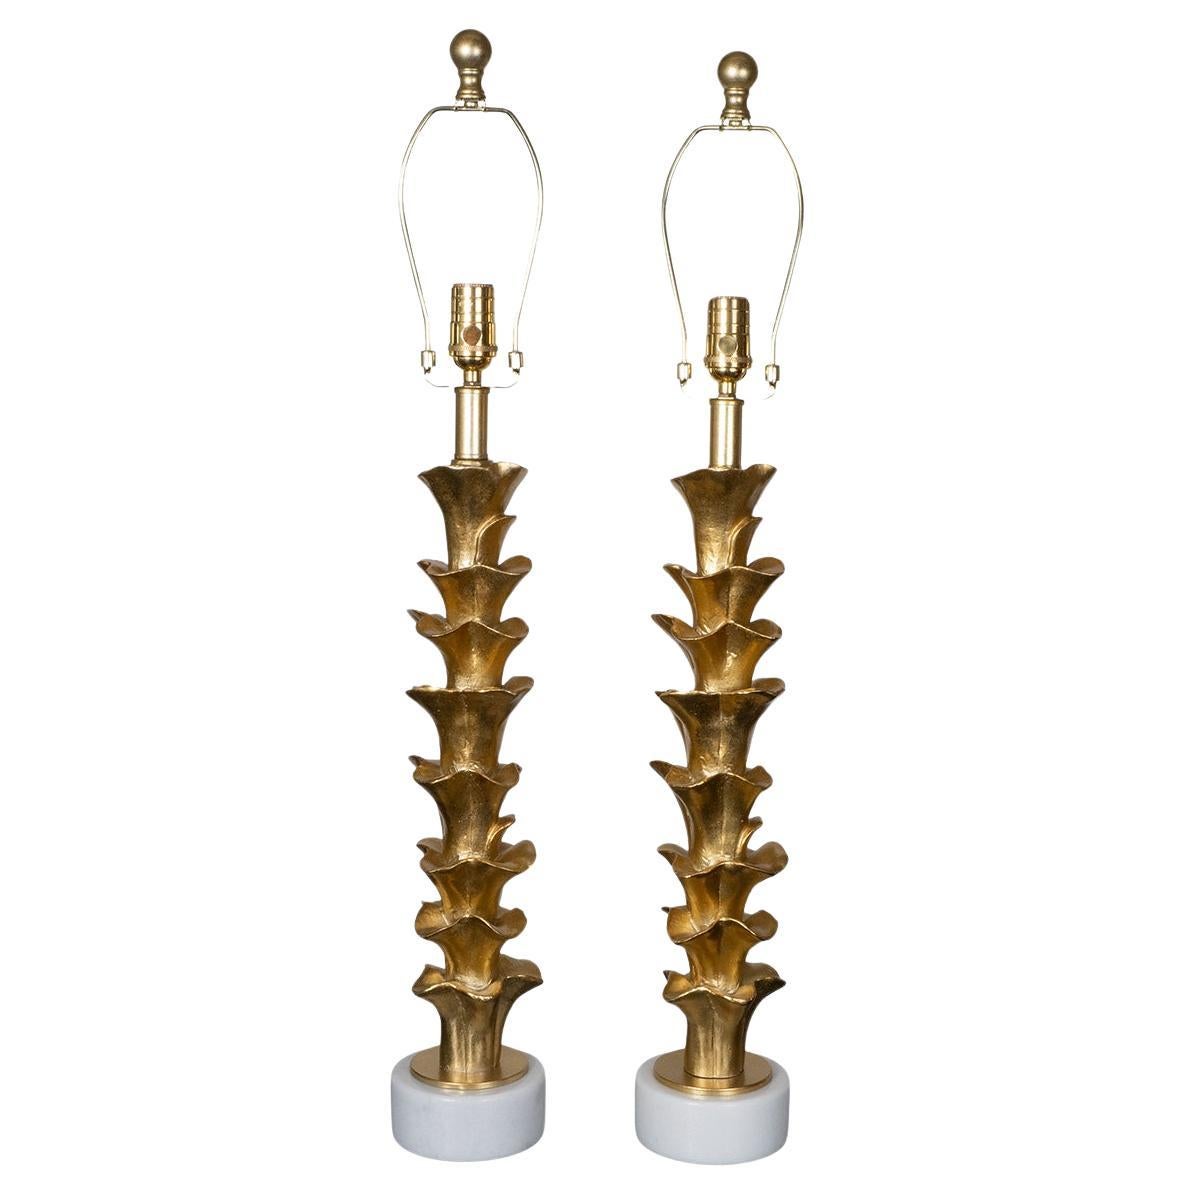 Pair of golden organic form composition table lamps